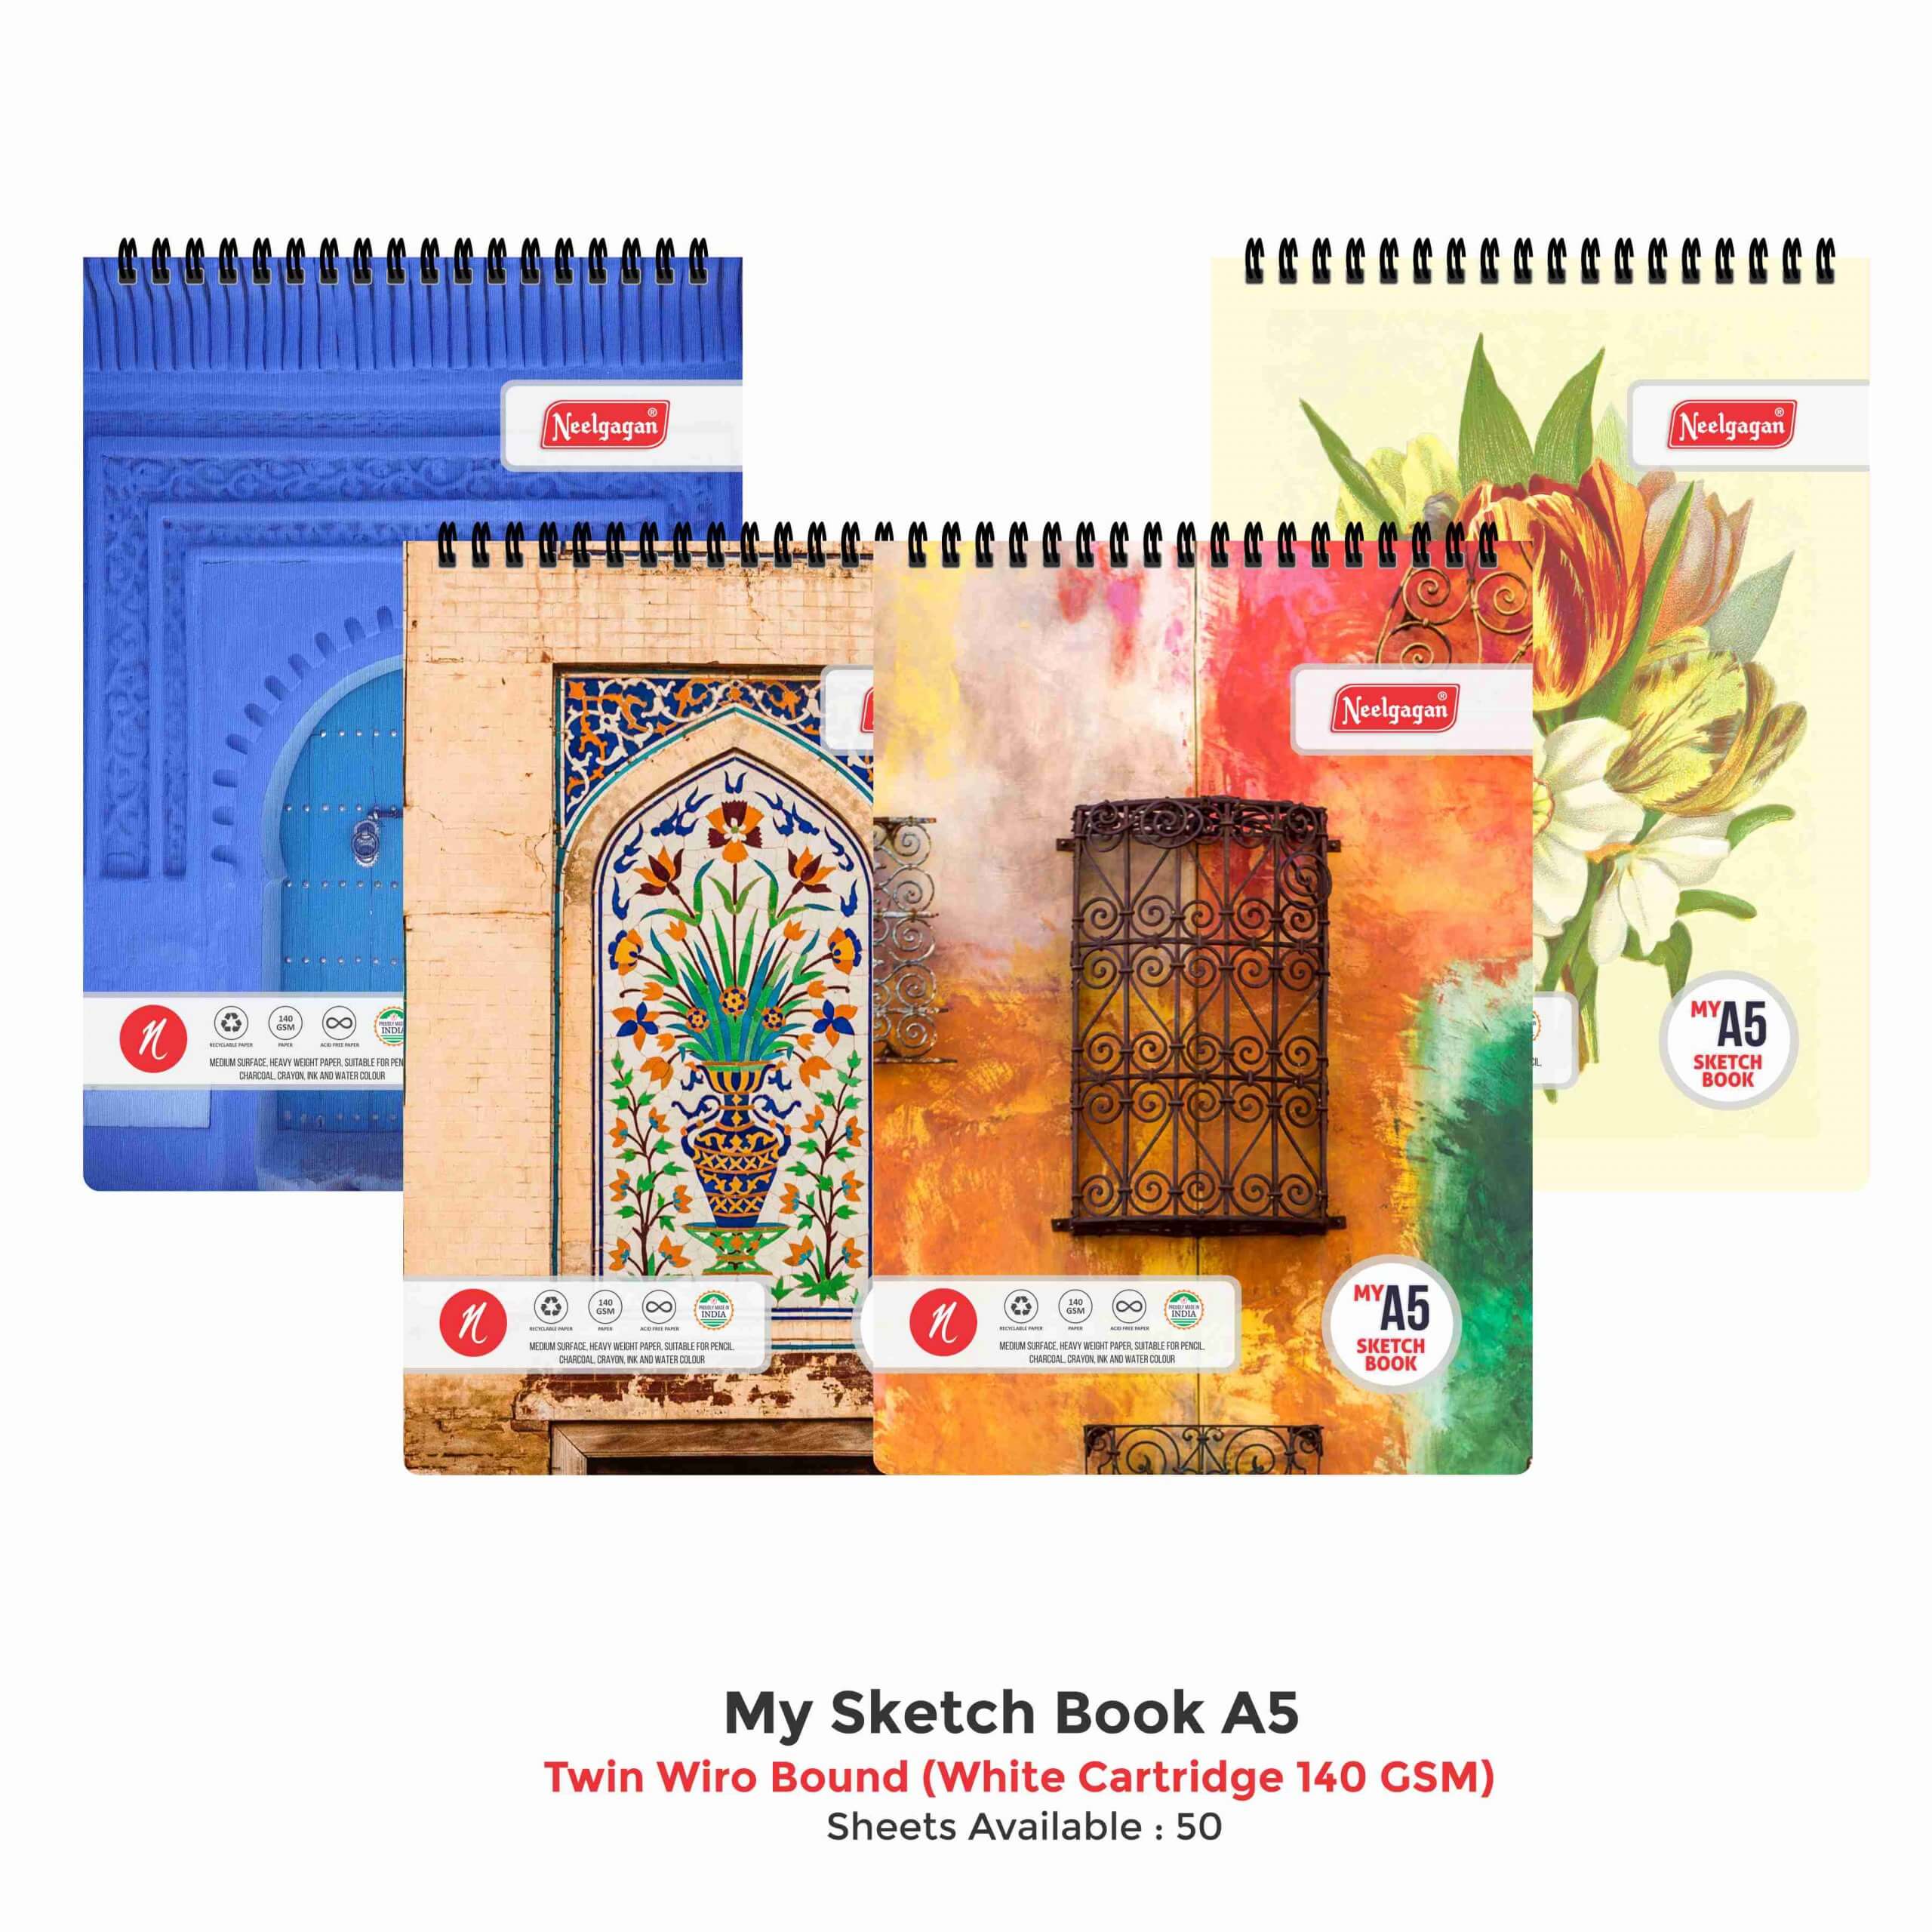 My Sketch Book A5- 50 Sheets (Twin Wiro Bound) (White Cartridge 140 GSM) 14.7cm X 21cm (Suitable for Drawing & Sketching)